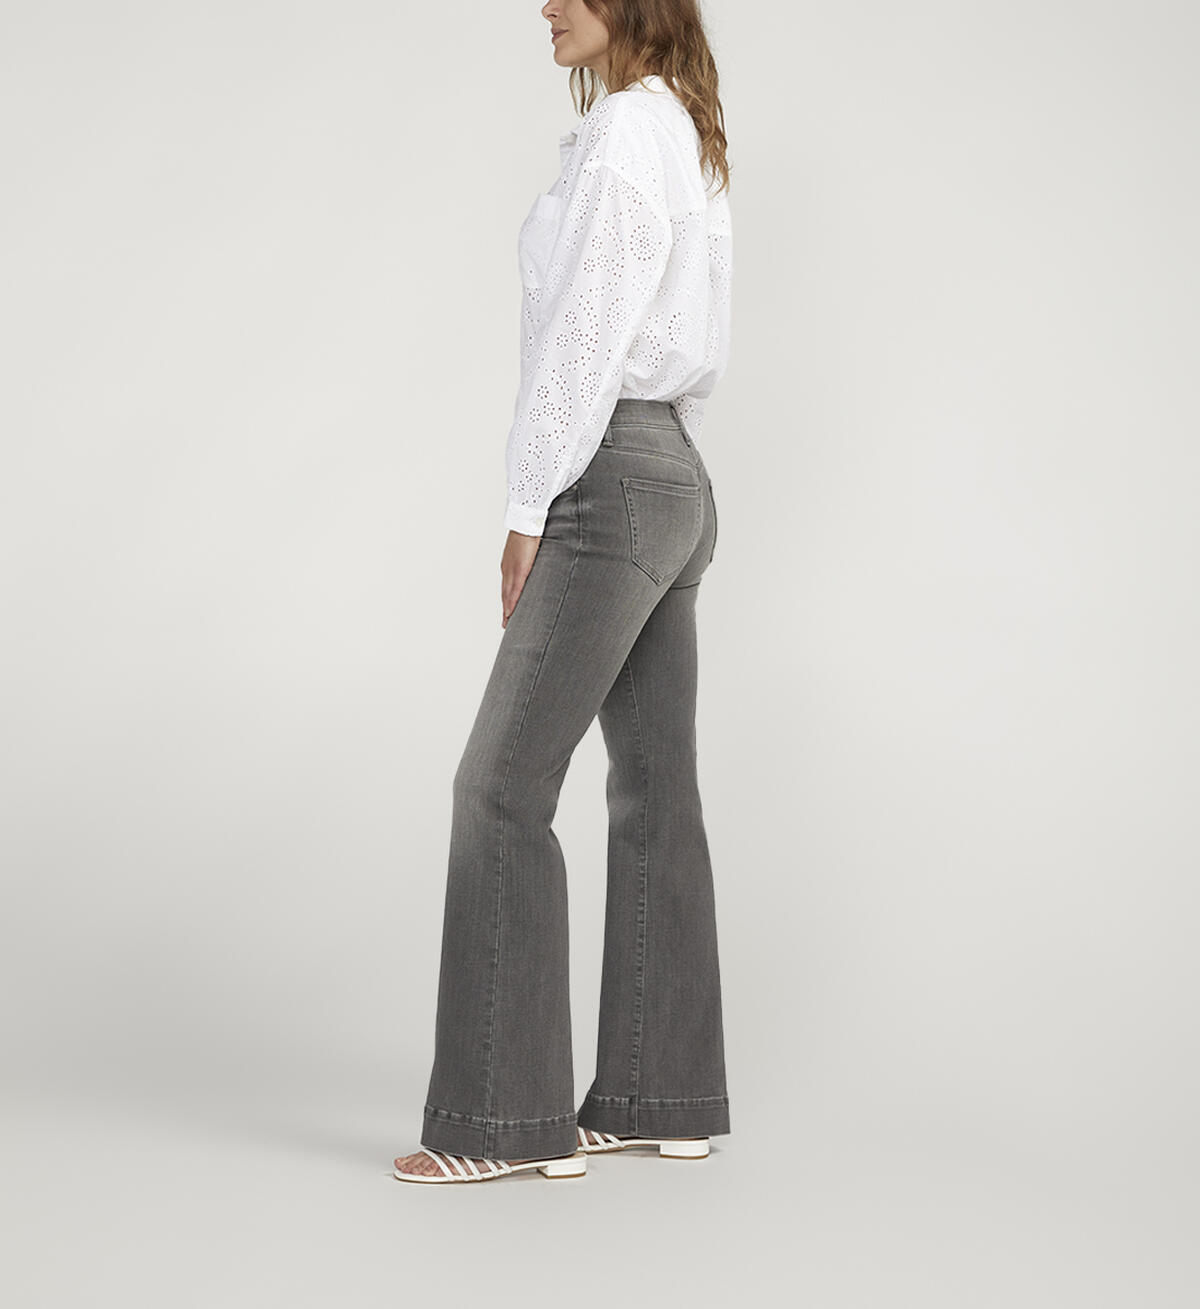 Kait Mid Rise Flare Leg Jeans, Overcast Grey, hi-res image number 2